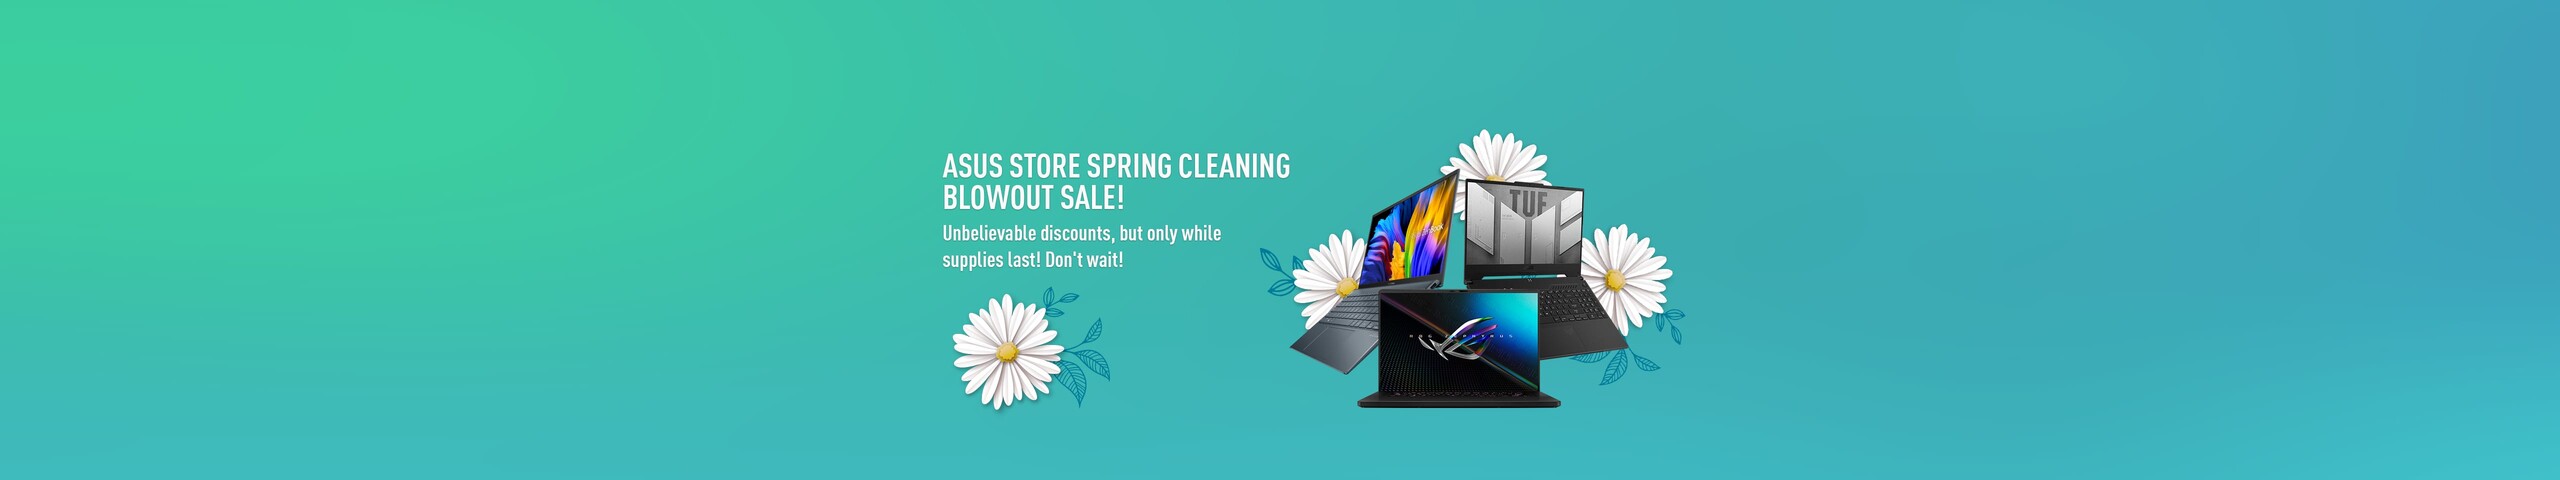 Spring Cleaning Blowout Sale